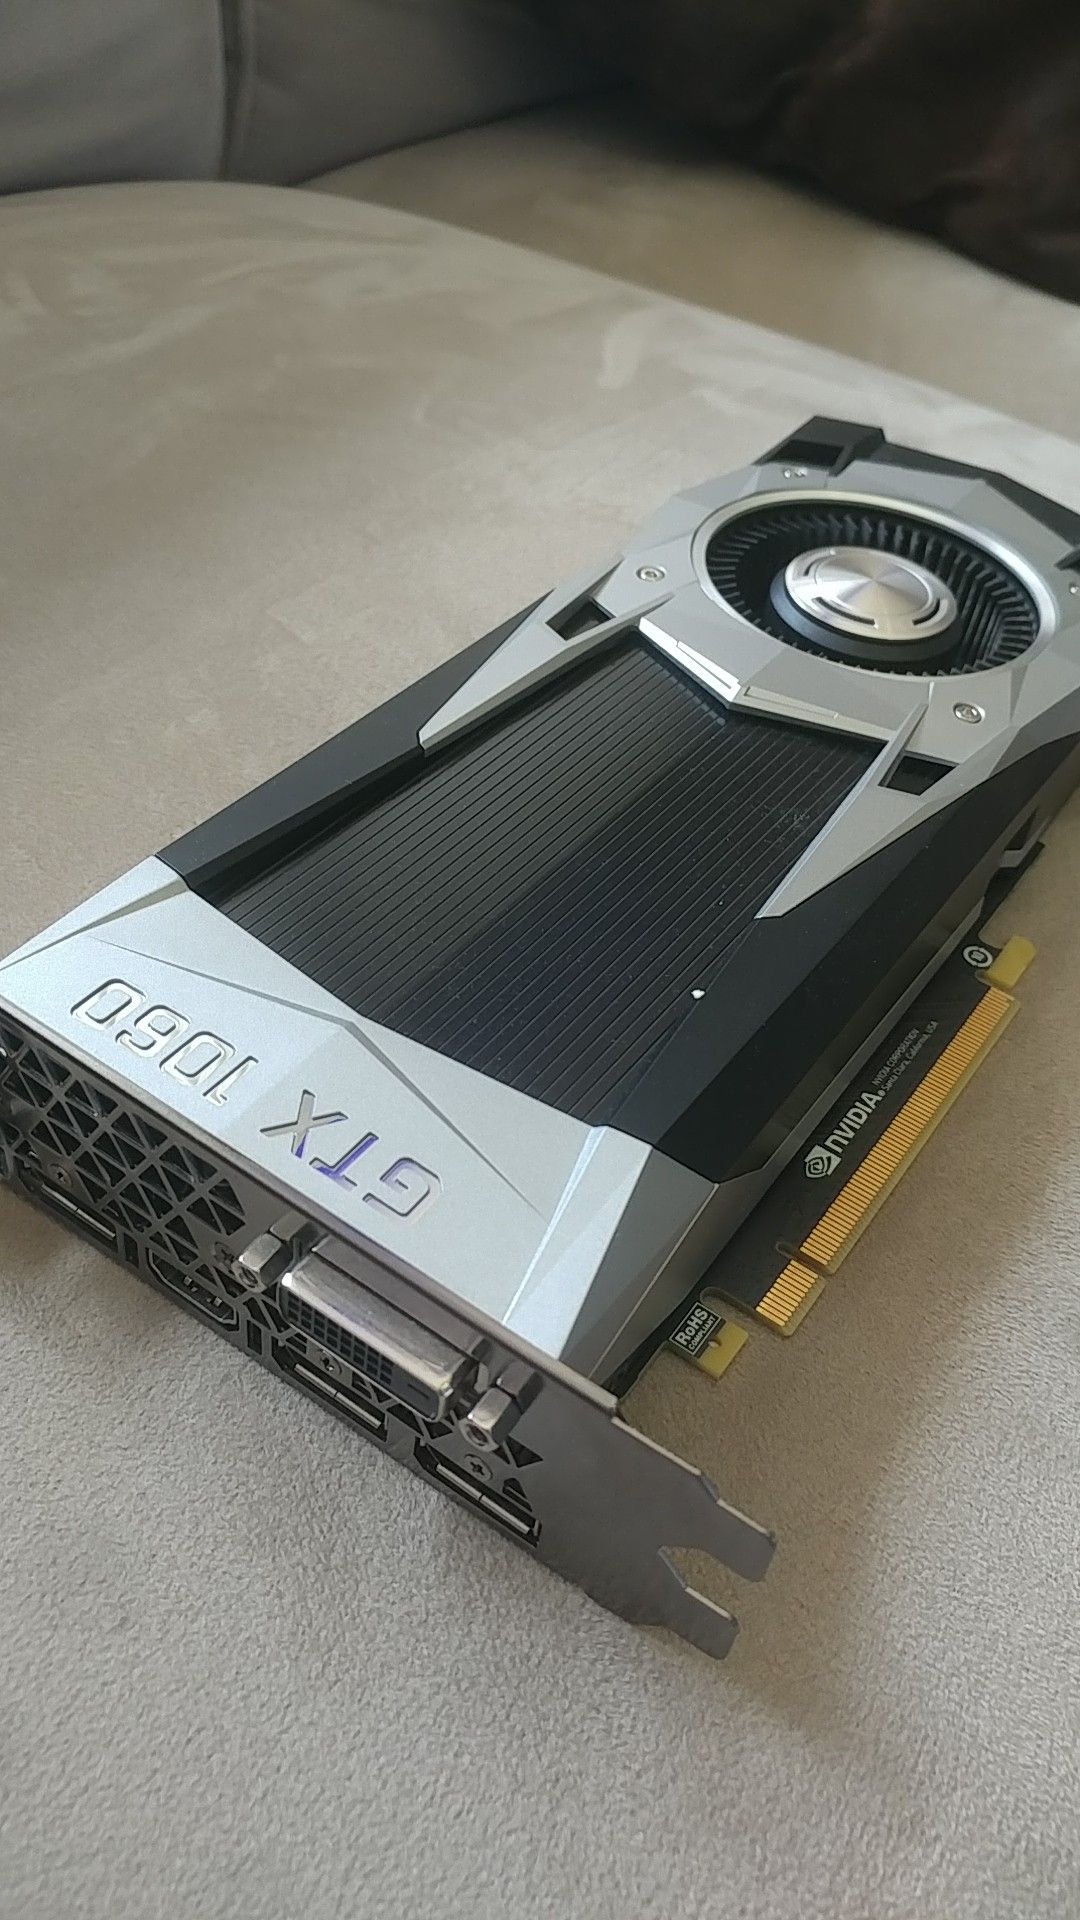 NVIDIA GeForce GTX 1060 6gb FE Founders Edition Graphics Card